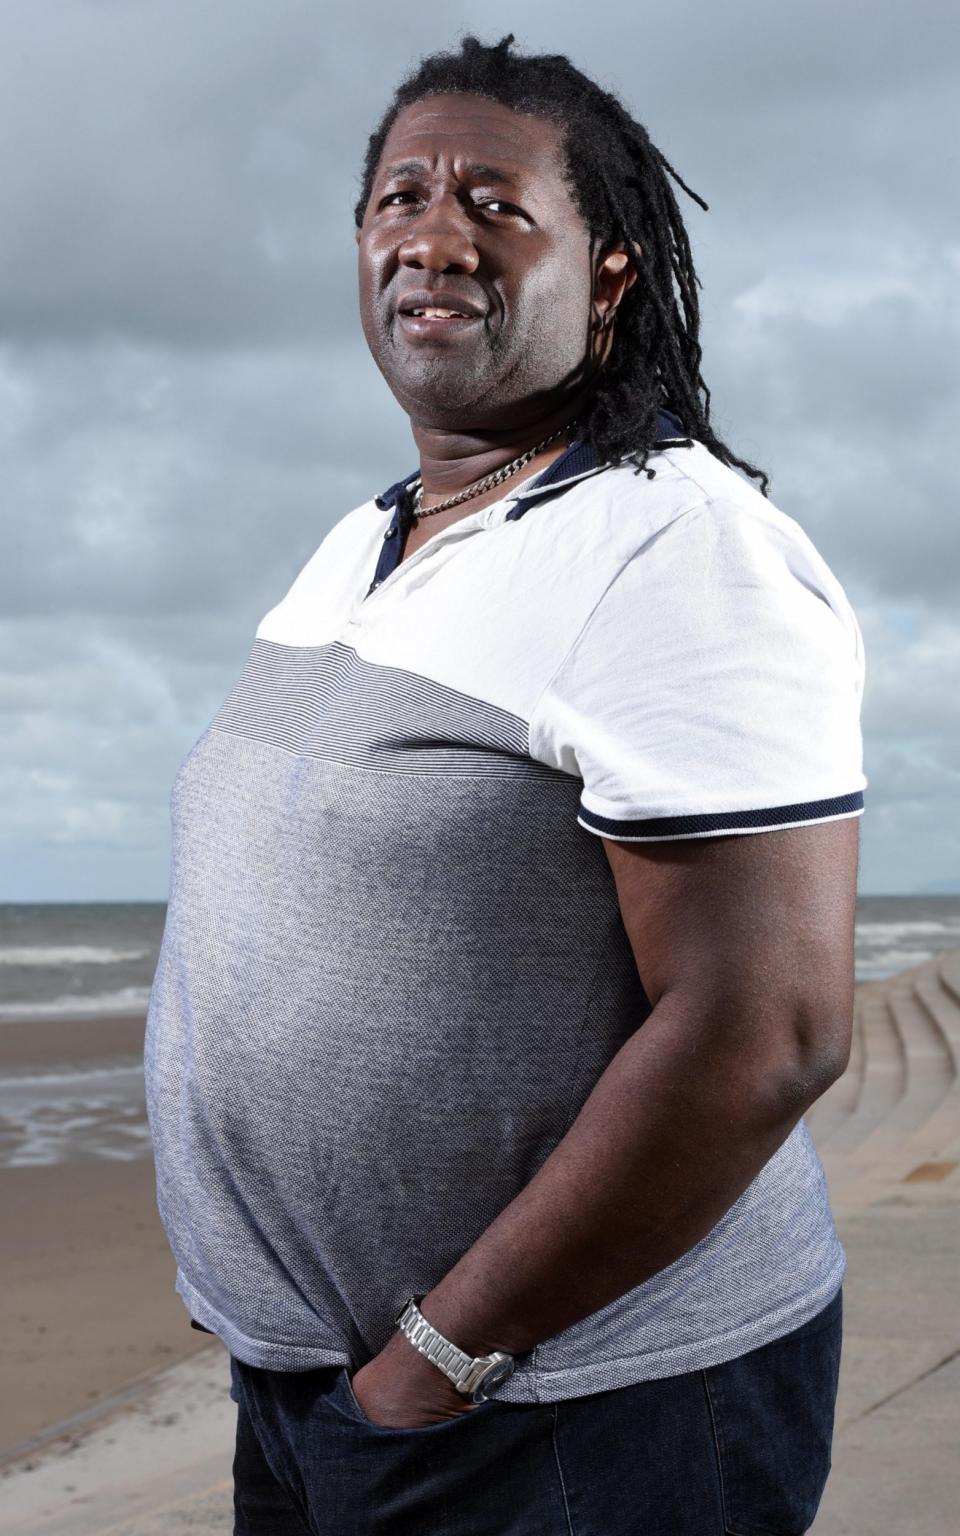 Scam victim Dexter Jeffrey stands by the beach while on holiday in Blackpool - Credit: Asadour Guzelian